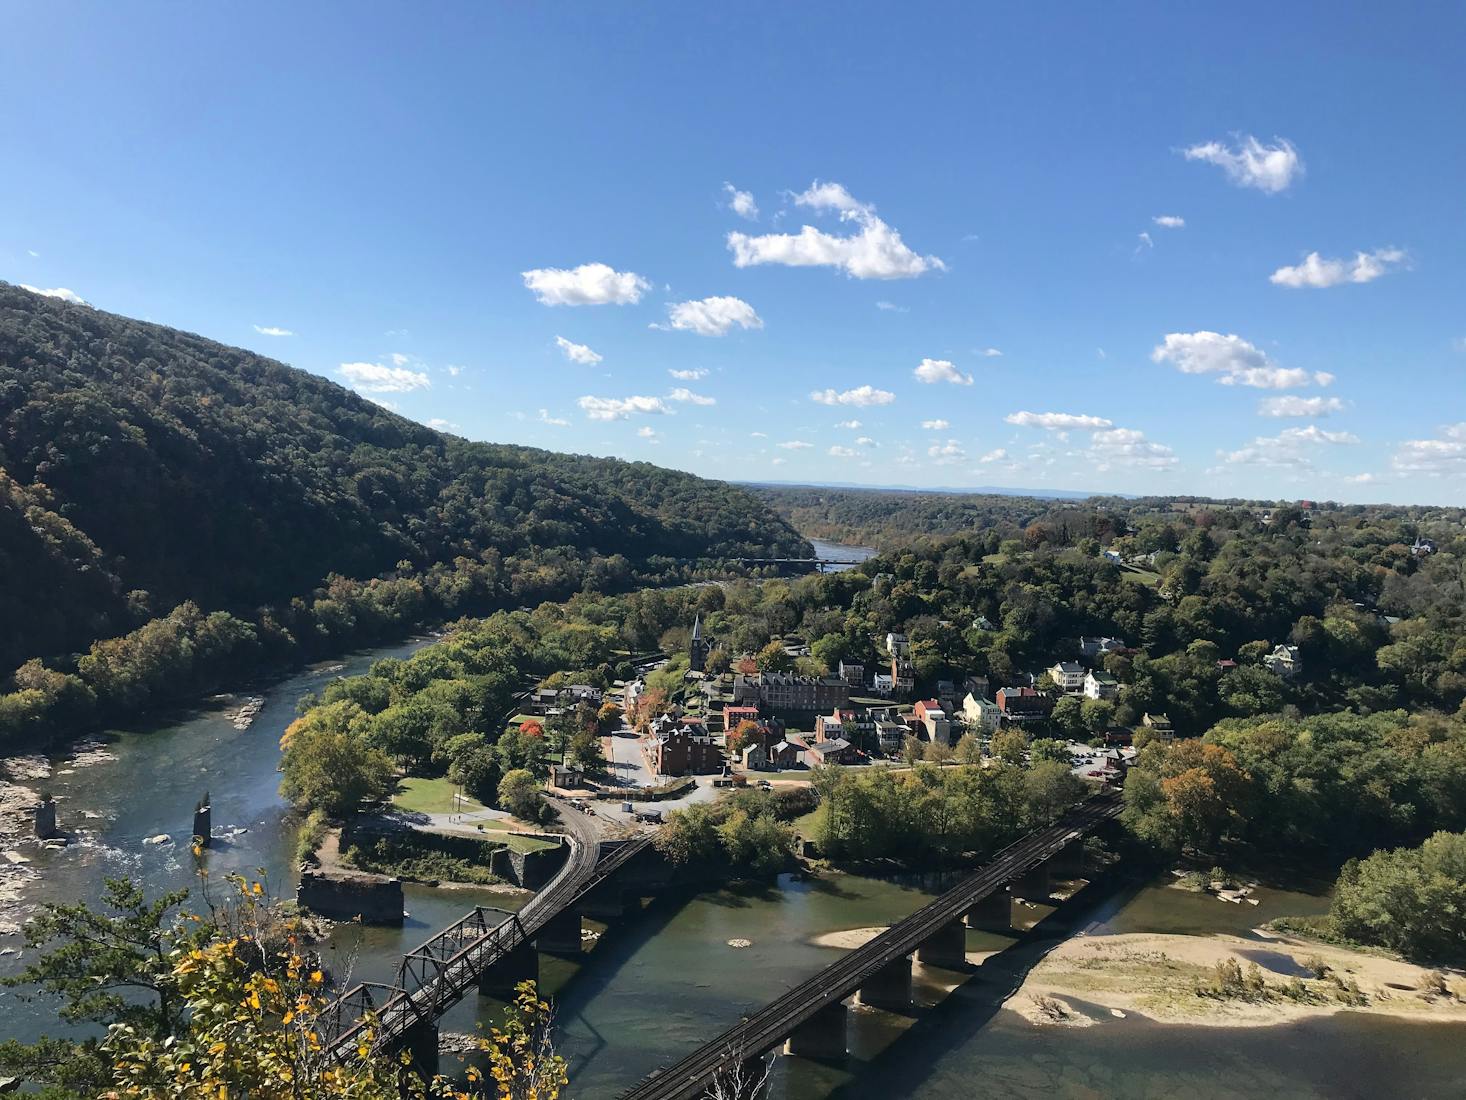 Weekend trip from Washington, DC, to Harpers Ferry